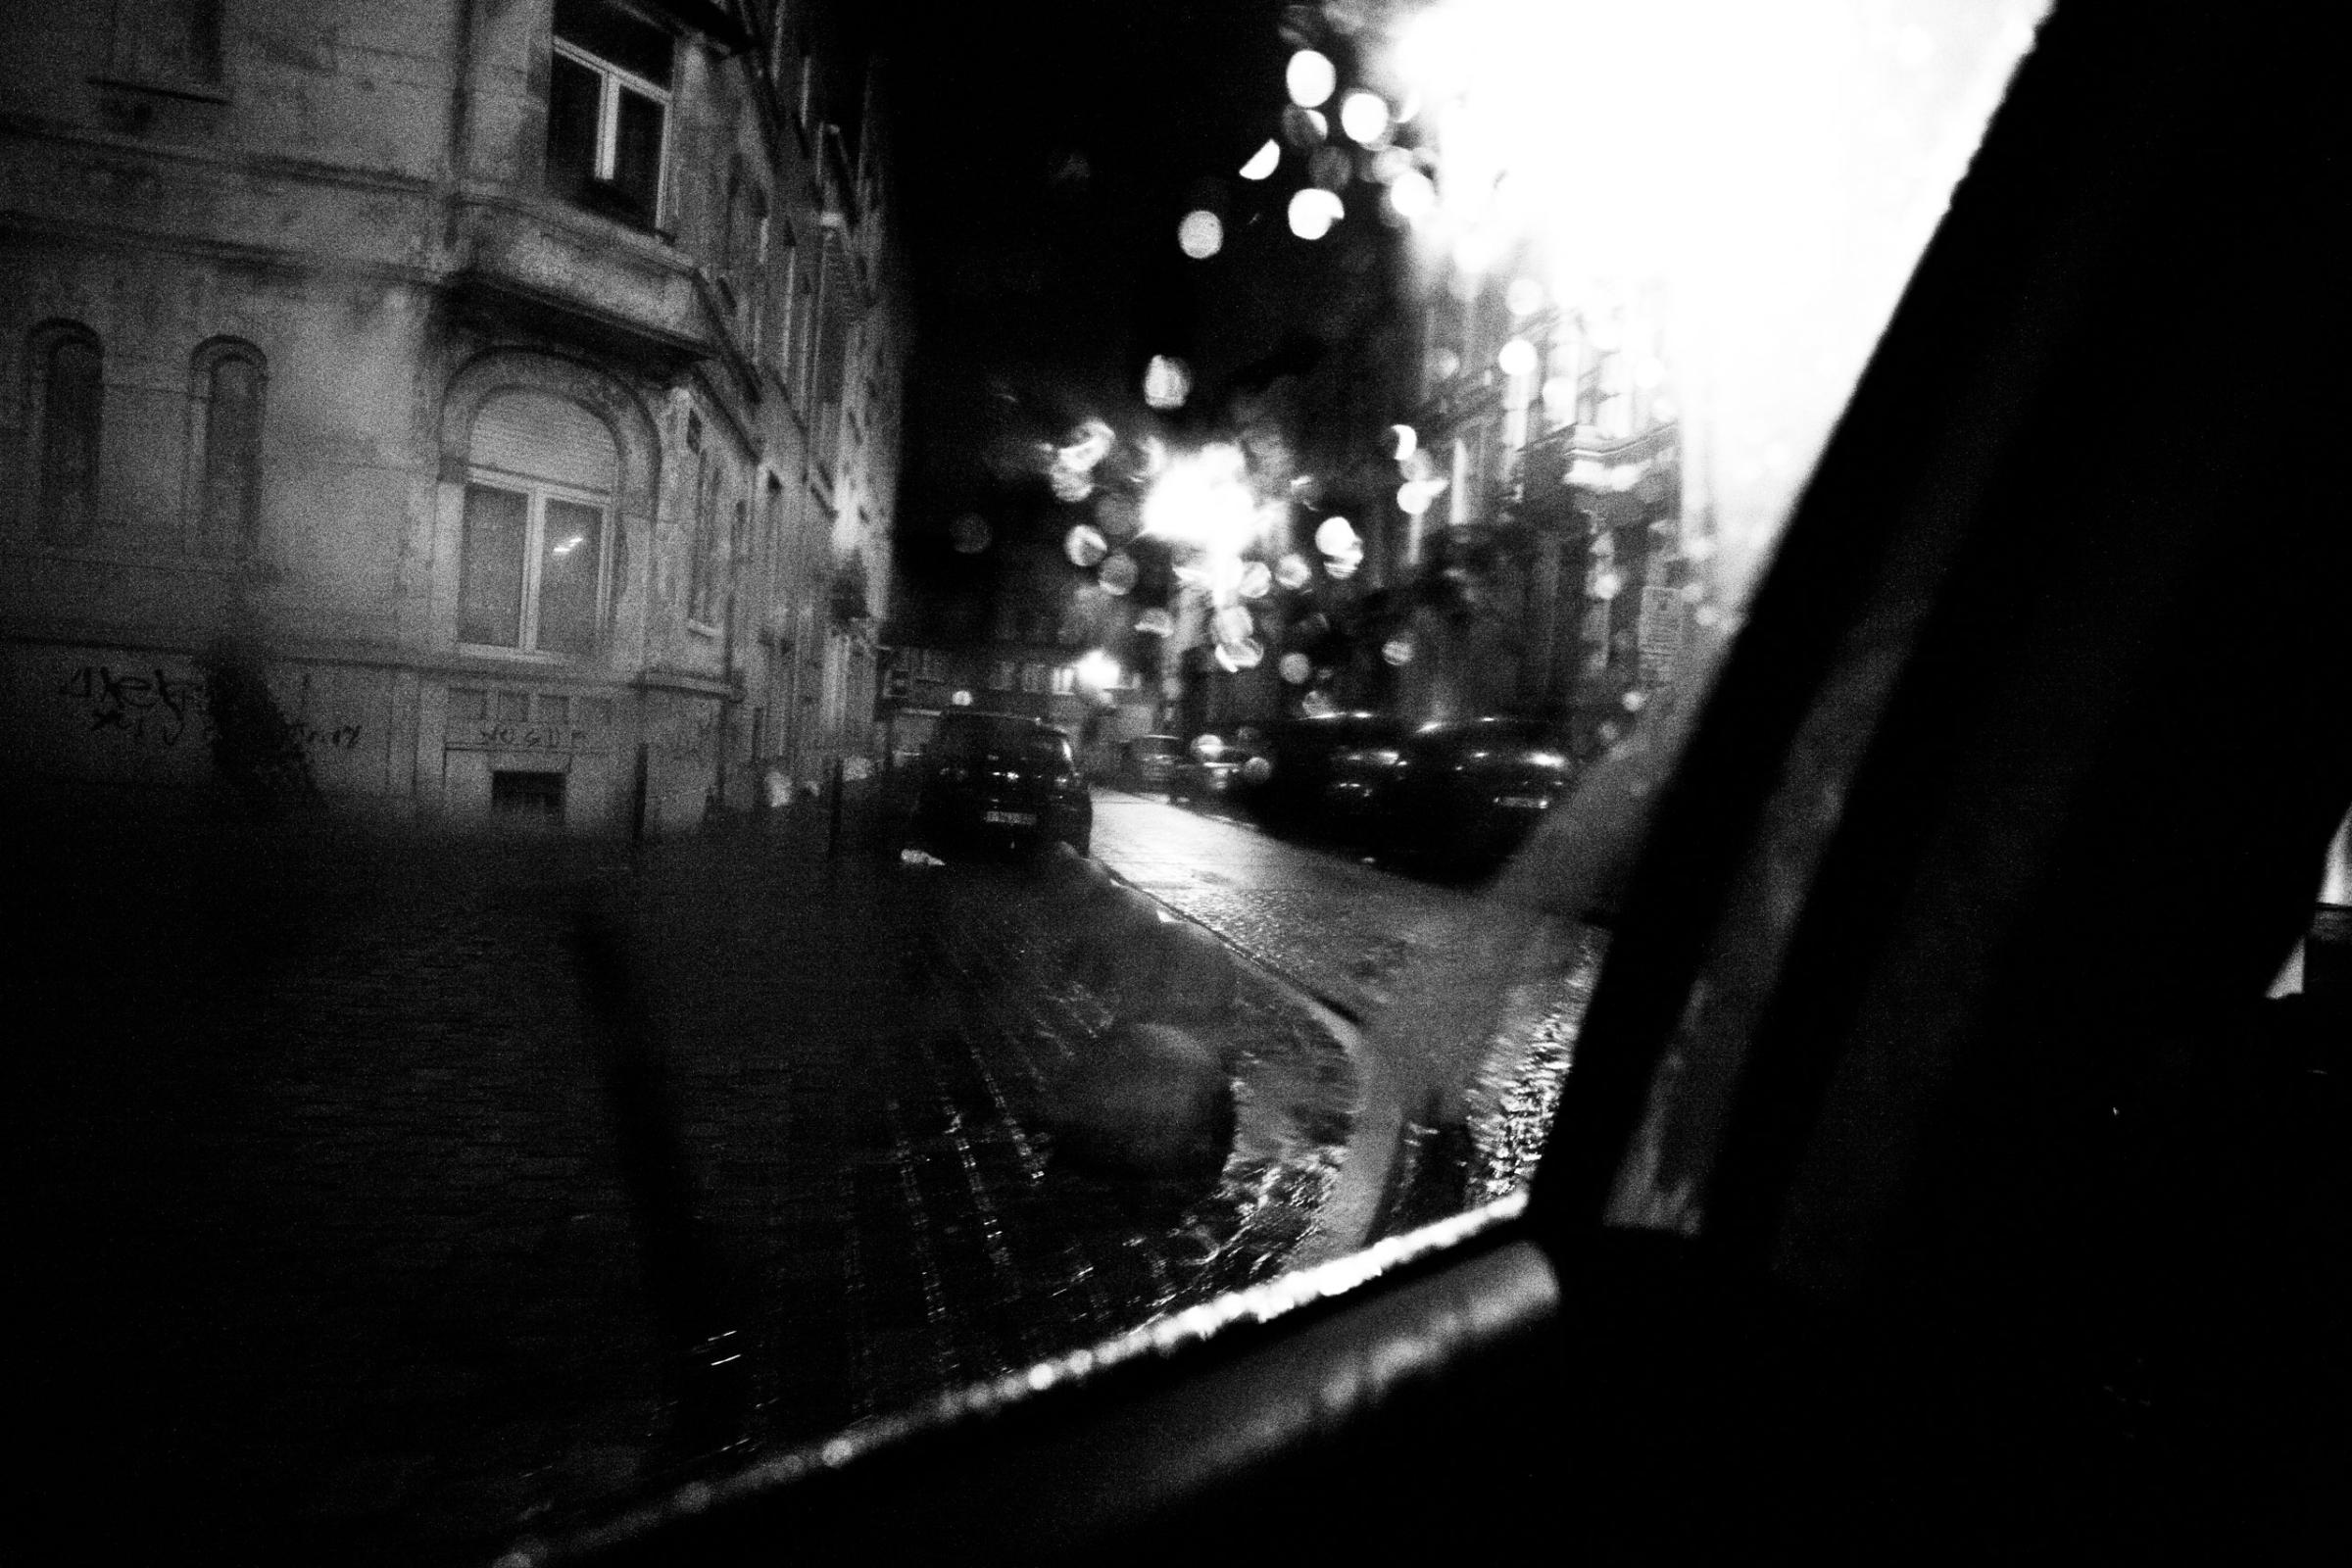 View from the window of the back seat of a police car driving trough the city of Molenbeek, Brussels Ouest District, Belgium on December 2011.